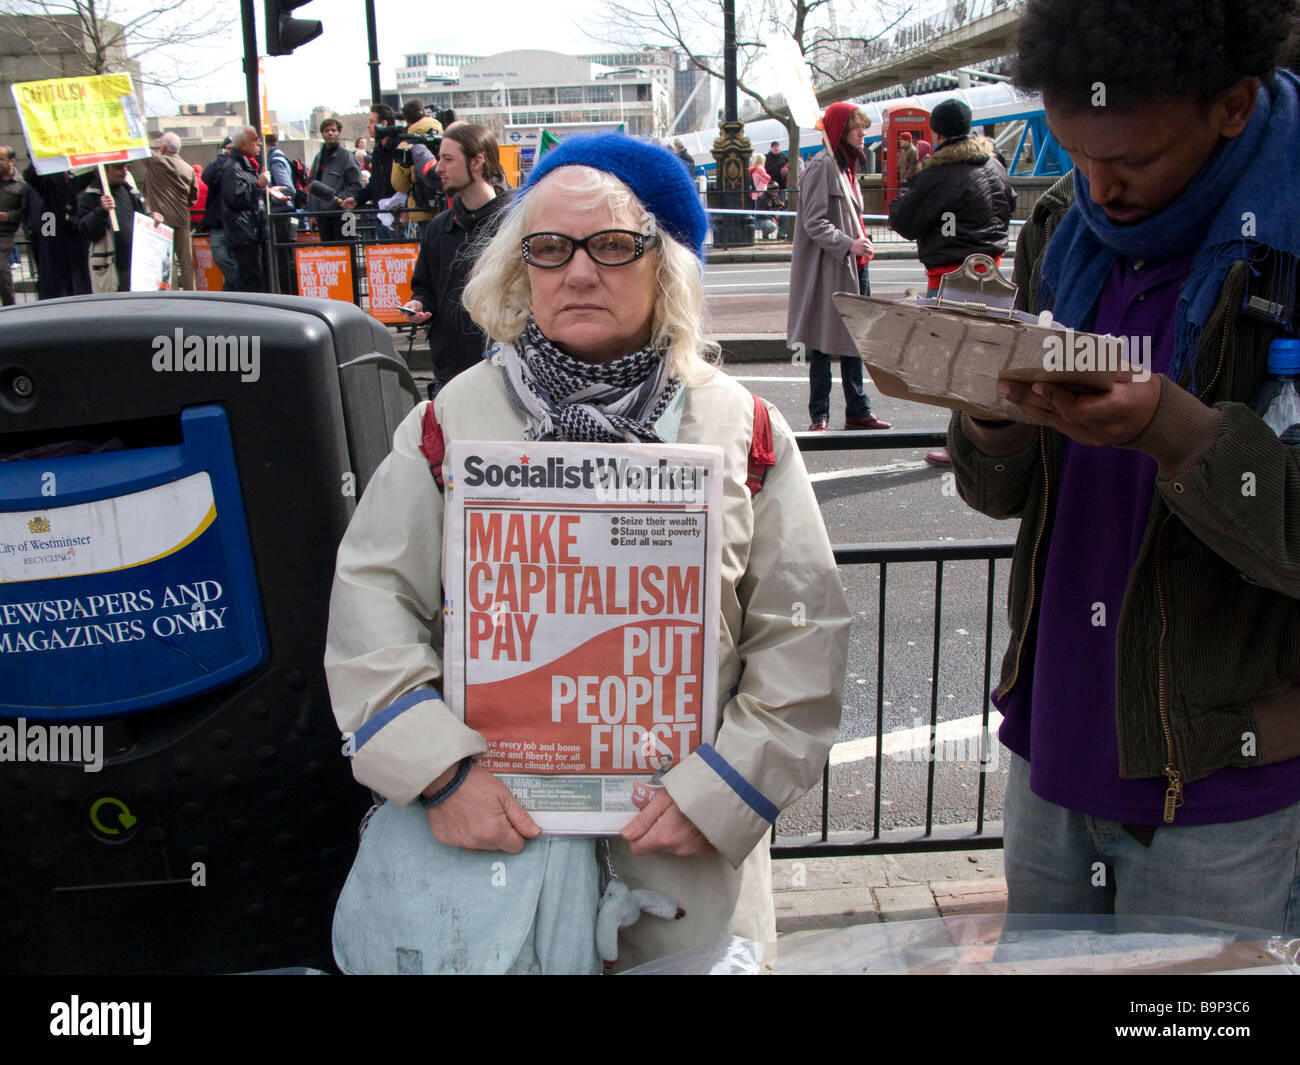 Socialist Worker newspaper seller at G20 protest march in central London, 28/03/09. Stock Photo